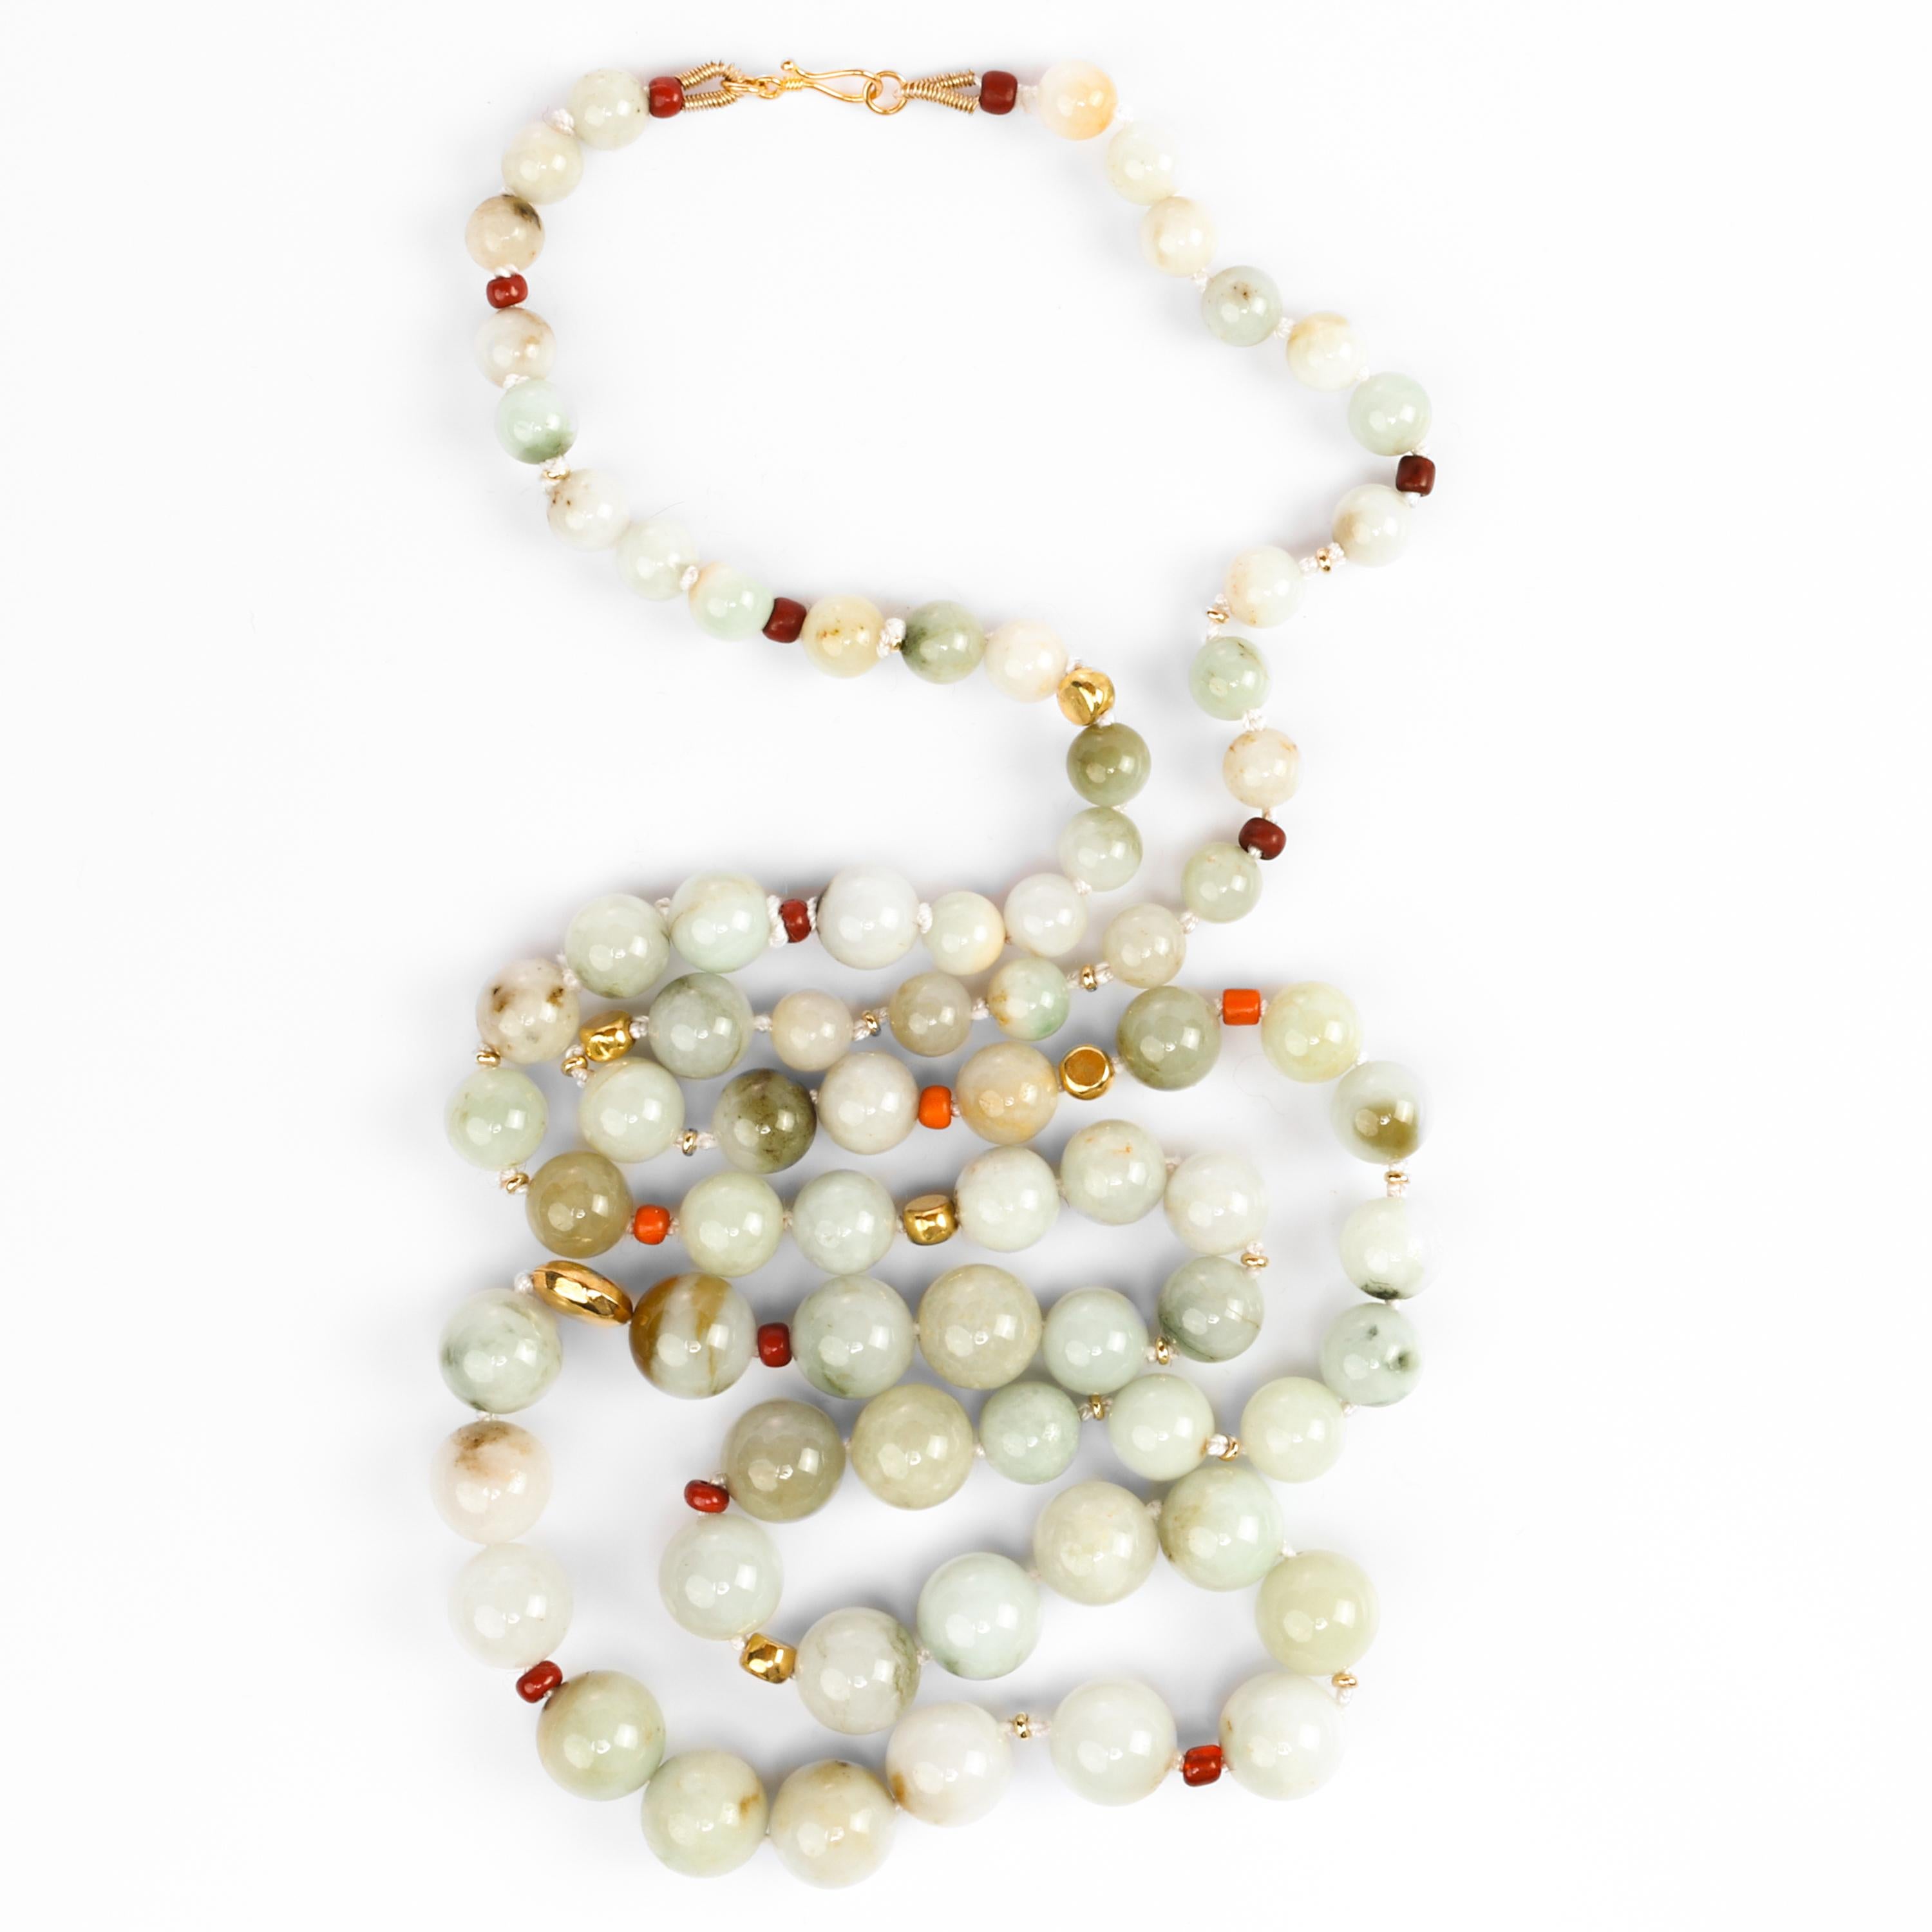 This fun and elegant handmade necklace is composed of 76 certified untreated Burmese jadeite jade beads strung and knotted on silk and punctuated with vintage red glass or clay beads and 18K yellow gold beads of different sizes and shapes. The